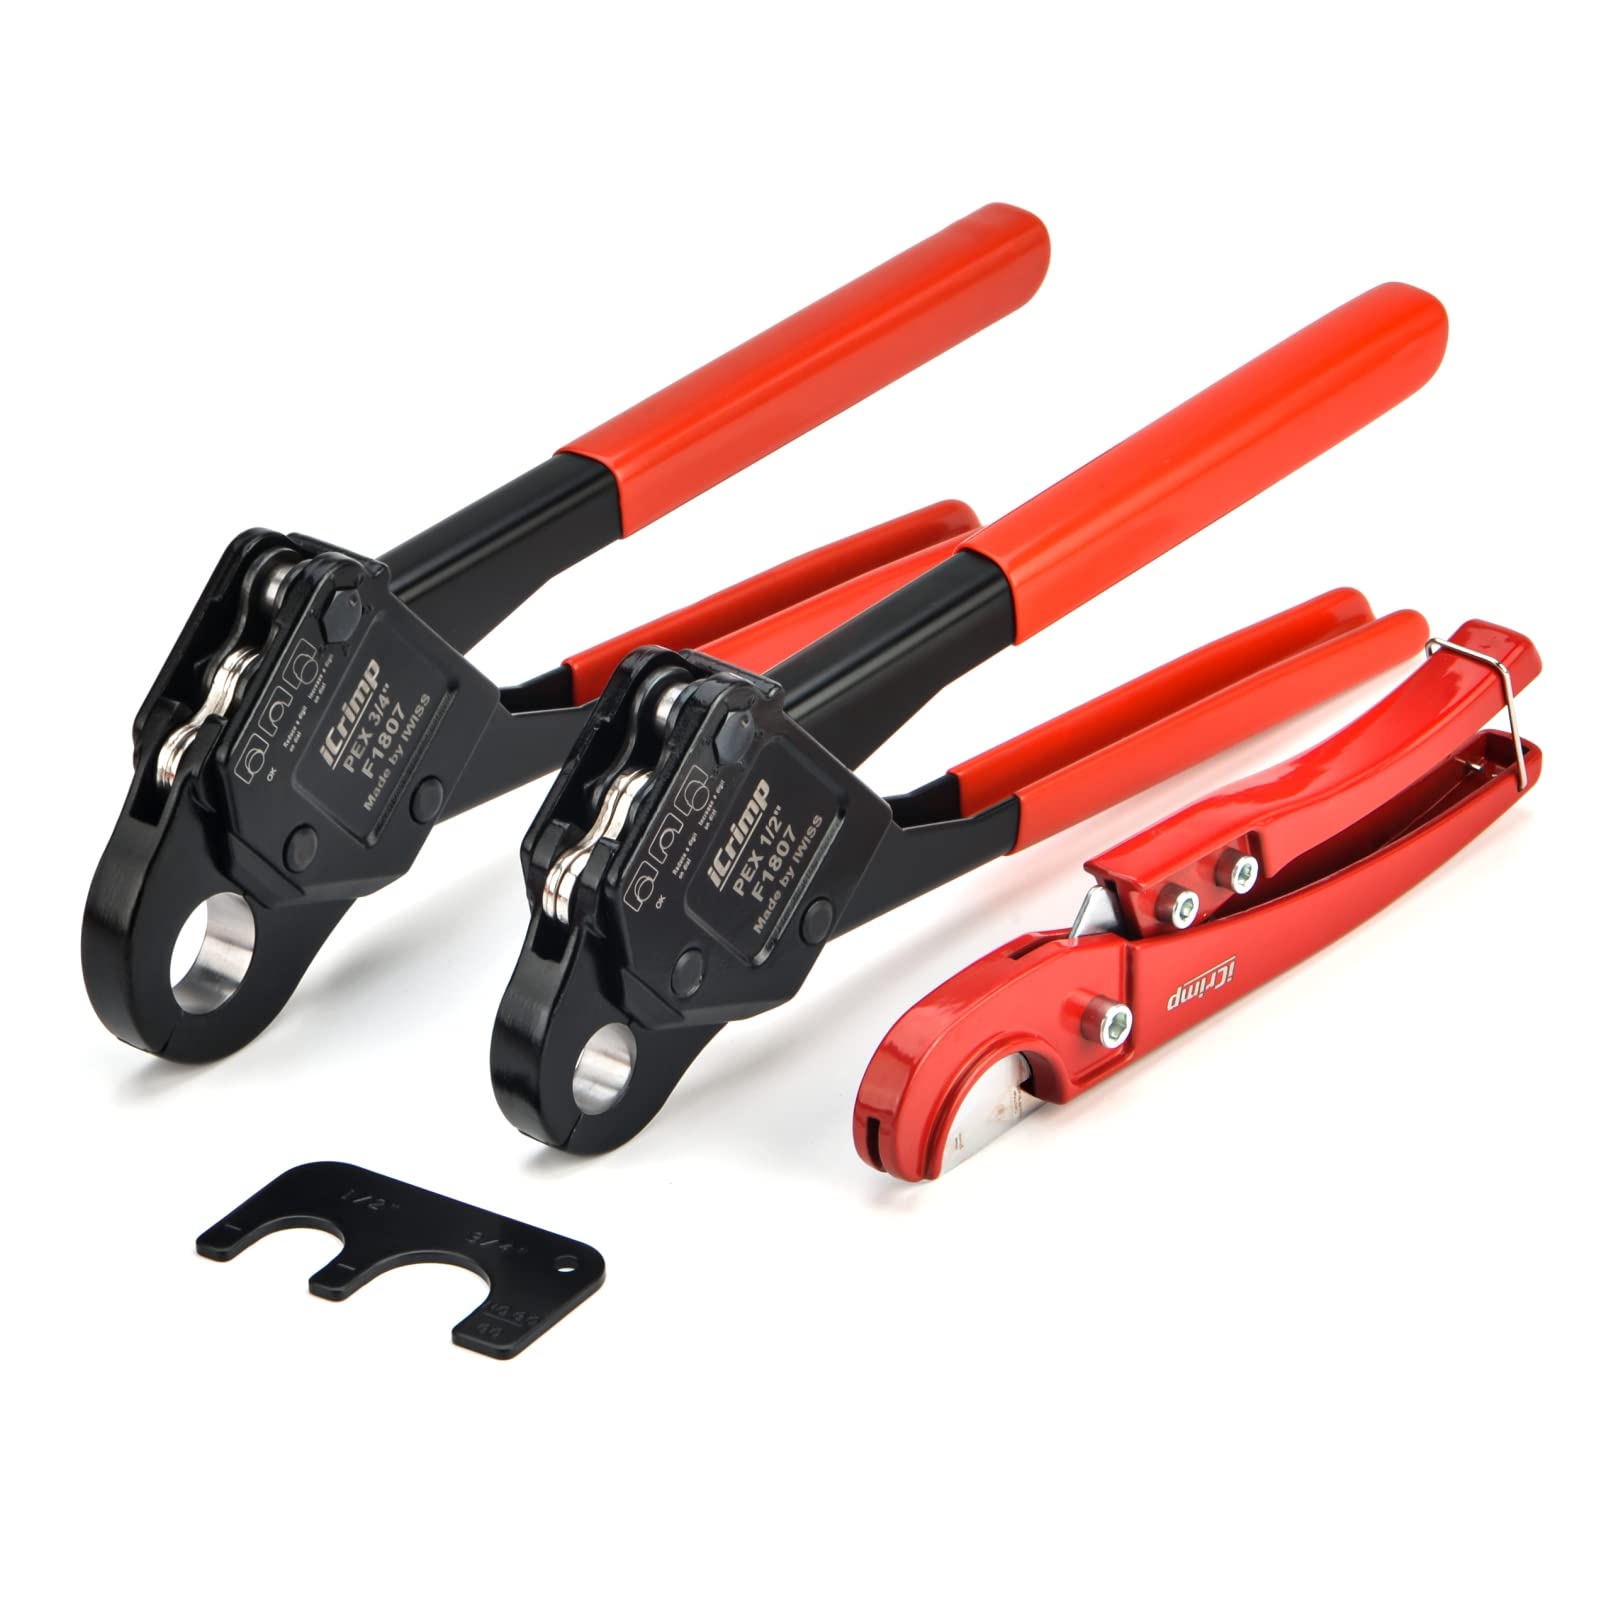 What Tools Are Needed For Pex Plumbing